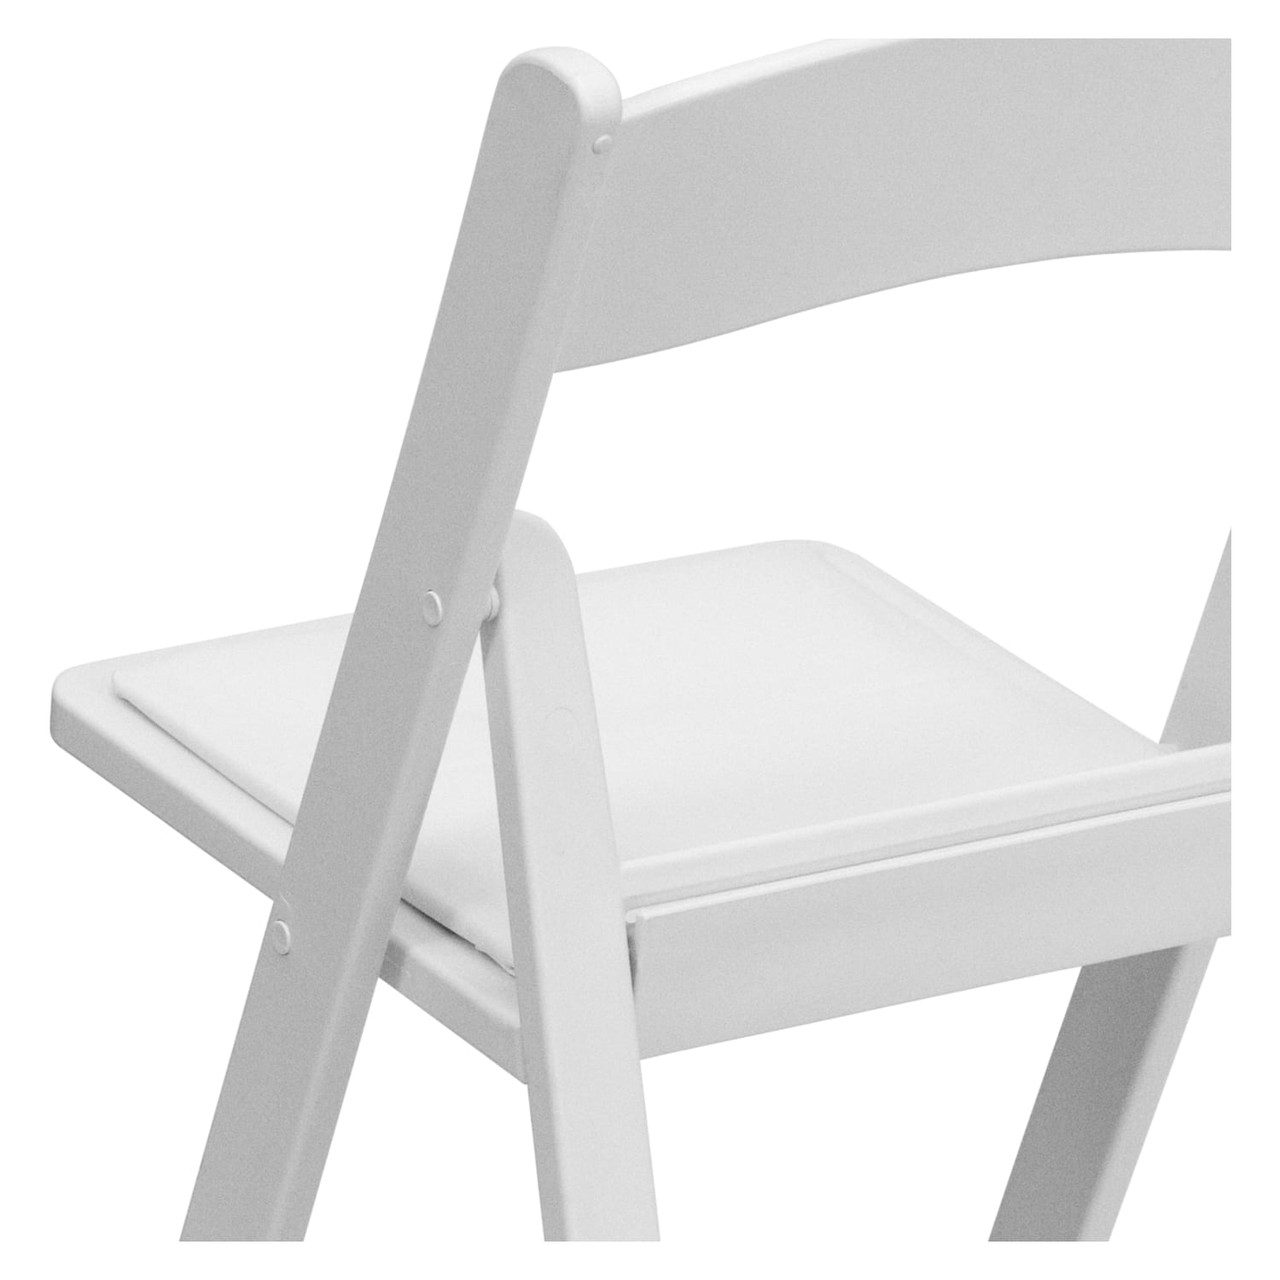 Hercules Folding Chair - White Resin - Comfortable Event Chair - Light Weight Folding Chair